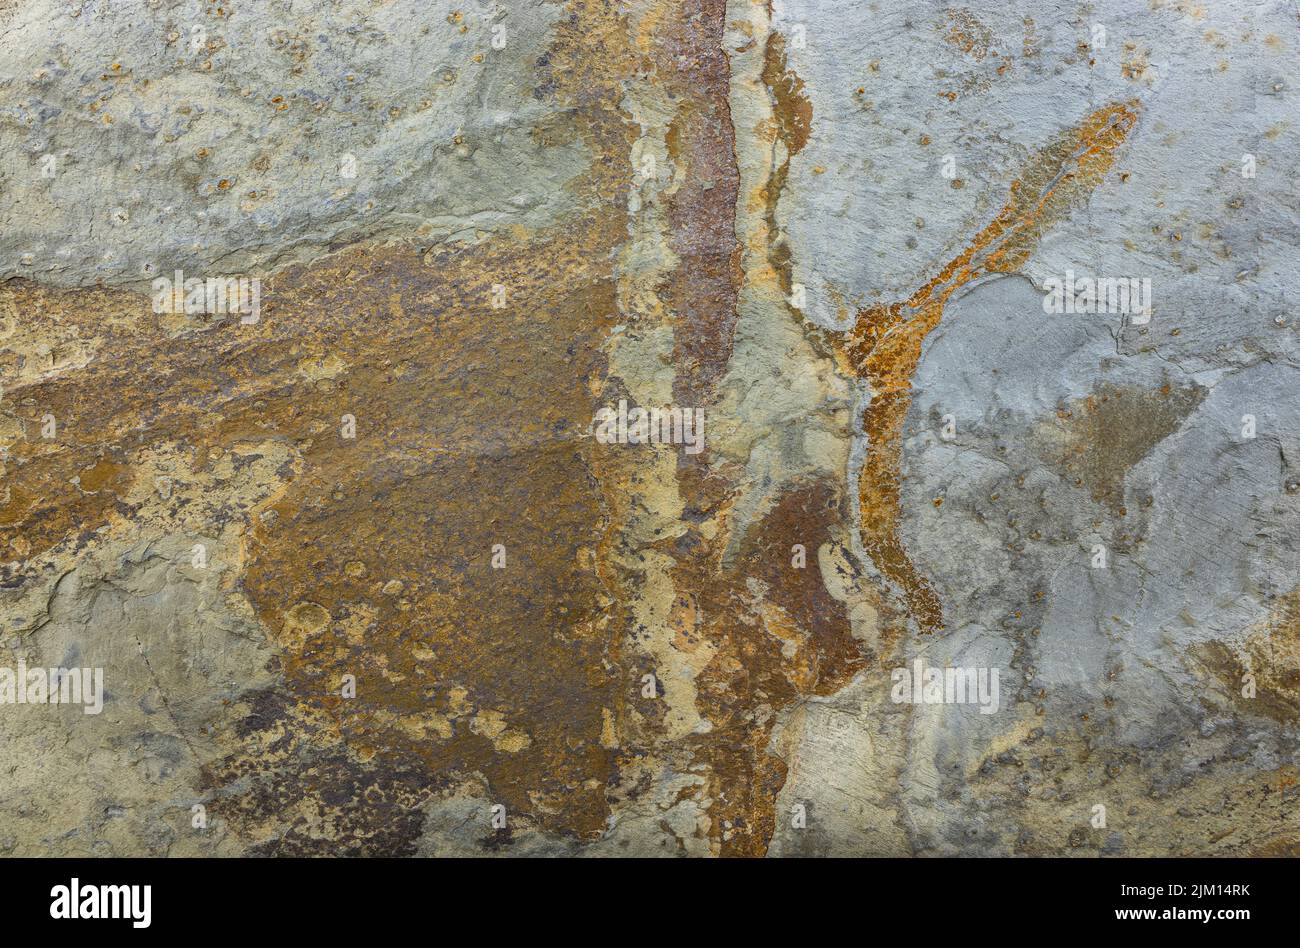 Grunge rusty background with corrosion and deep crack on the texture of the surface Stock Photo